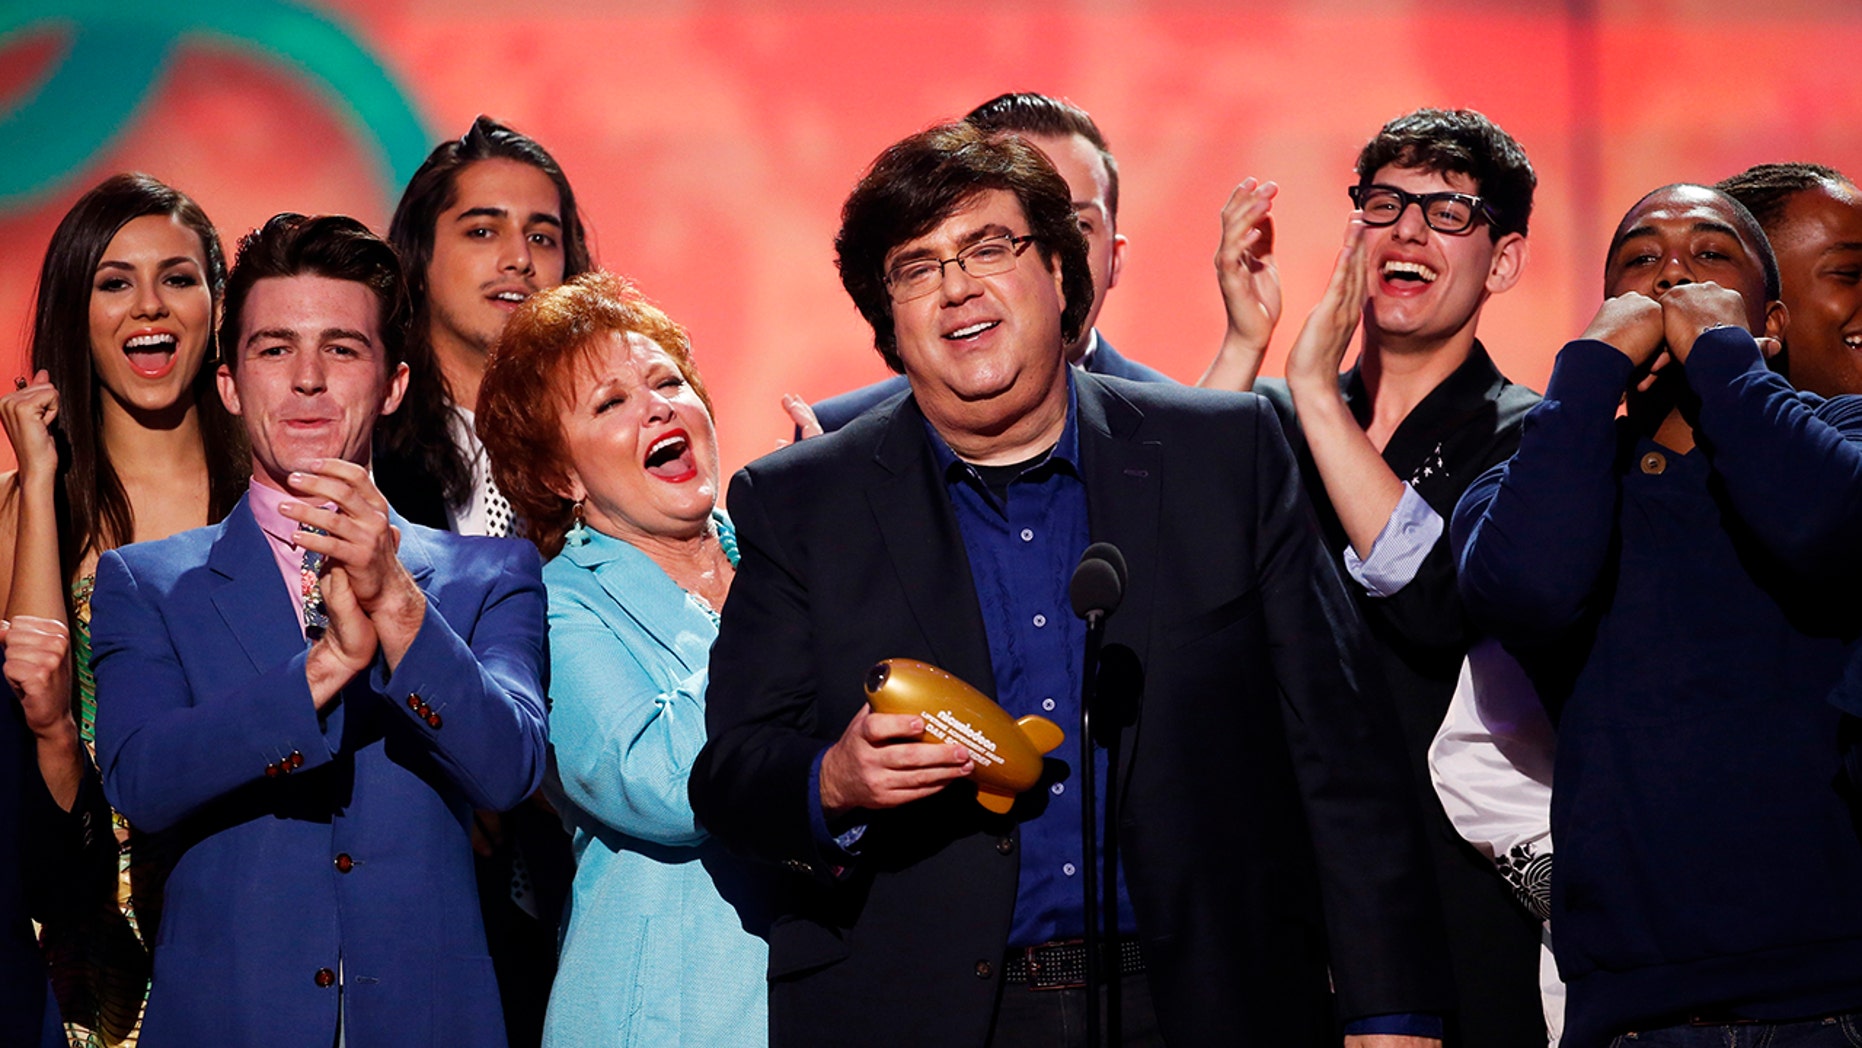 Nickelodeon cuts ties with famed producer Dan Schneider Fox News